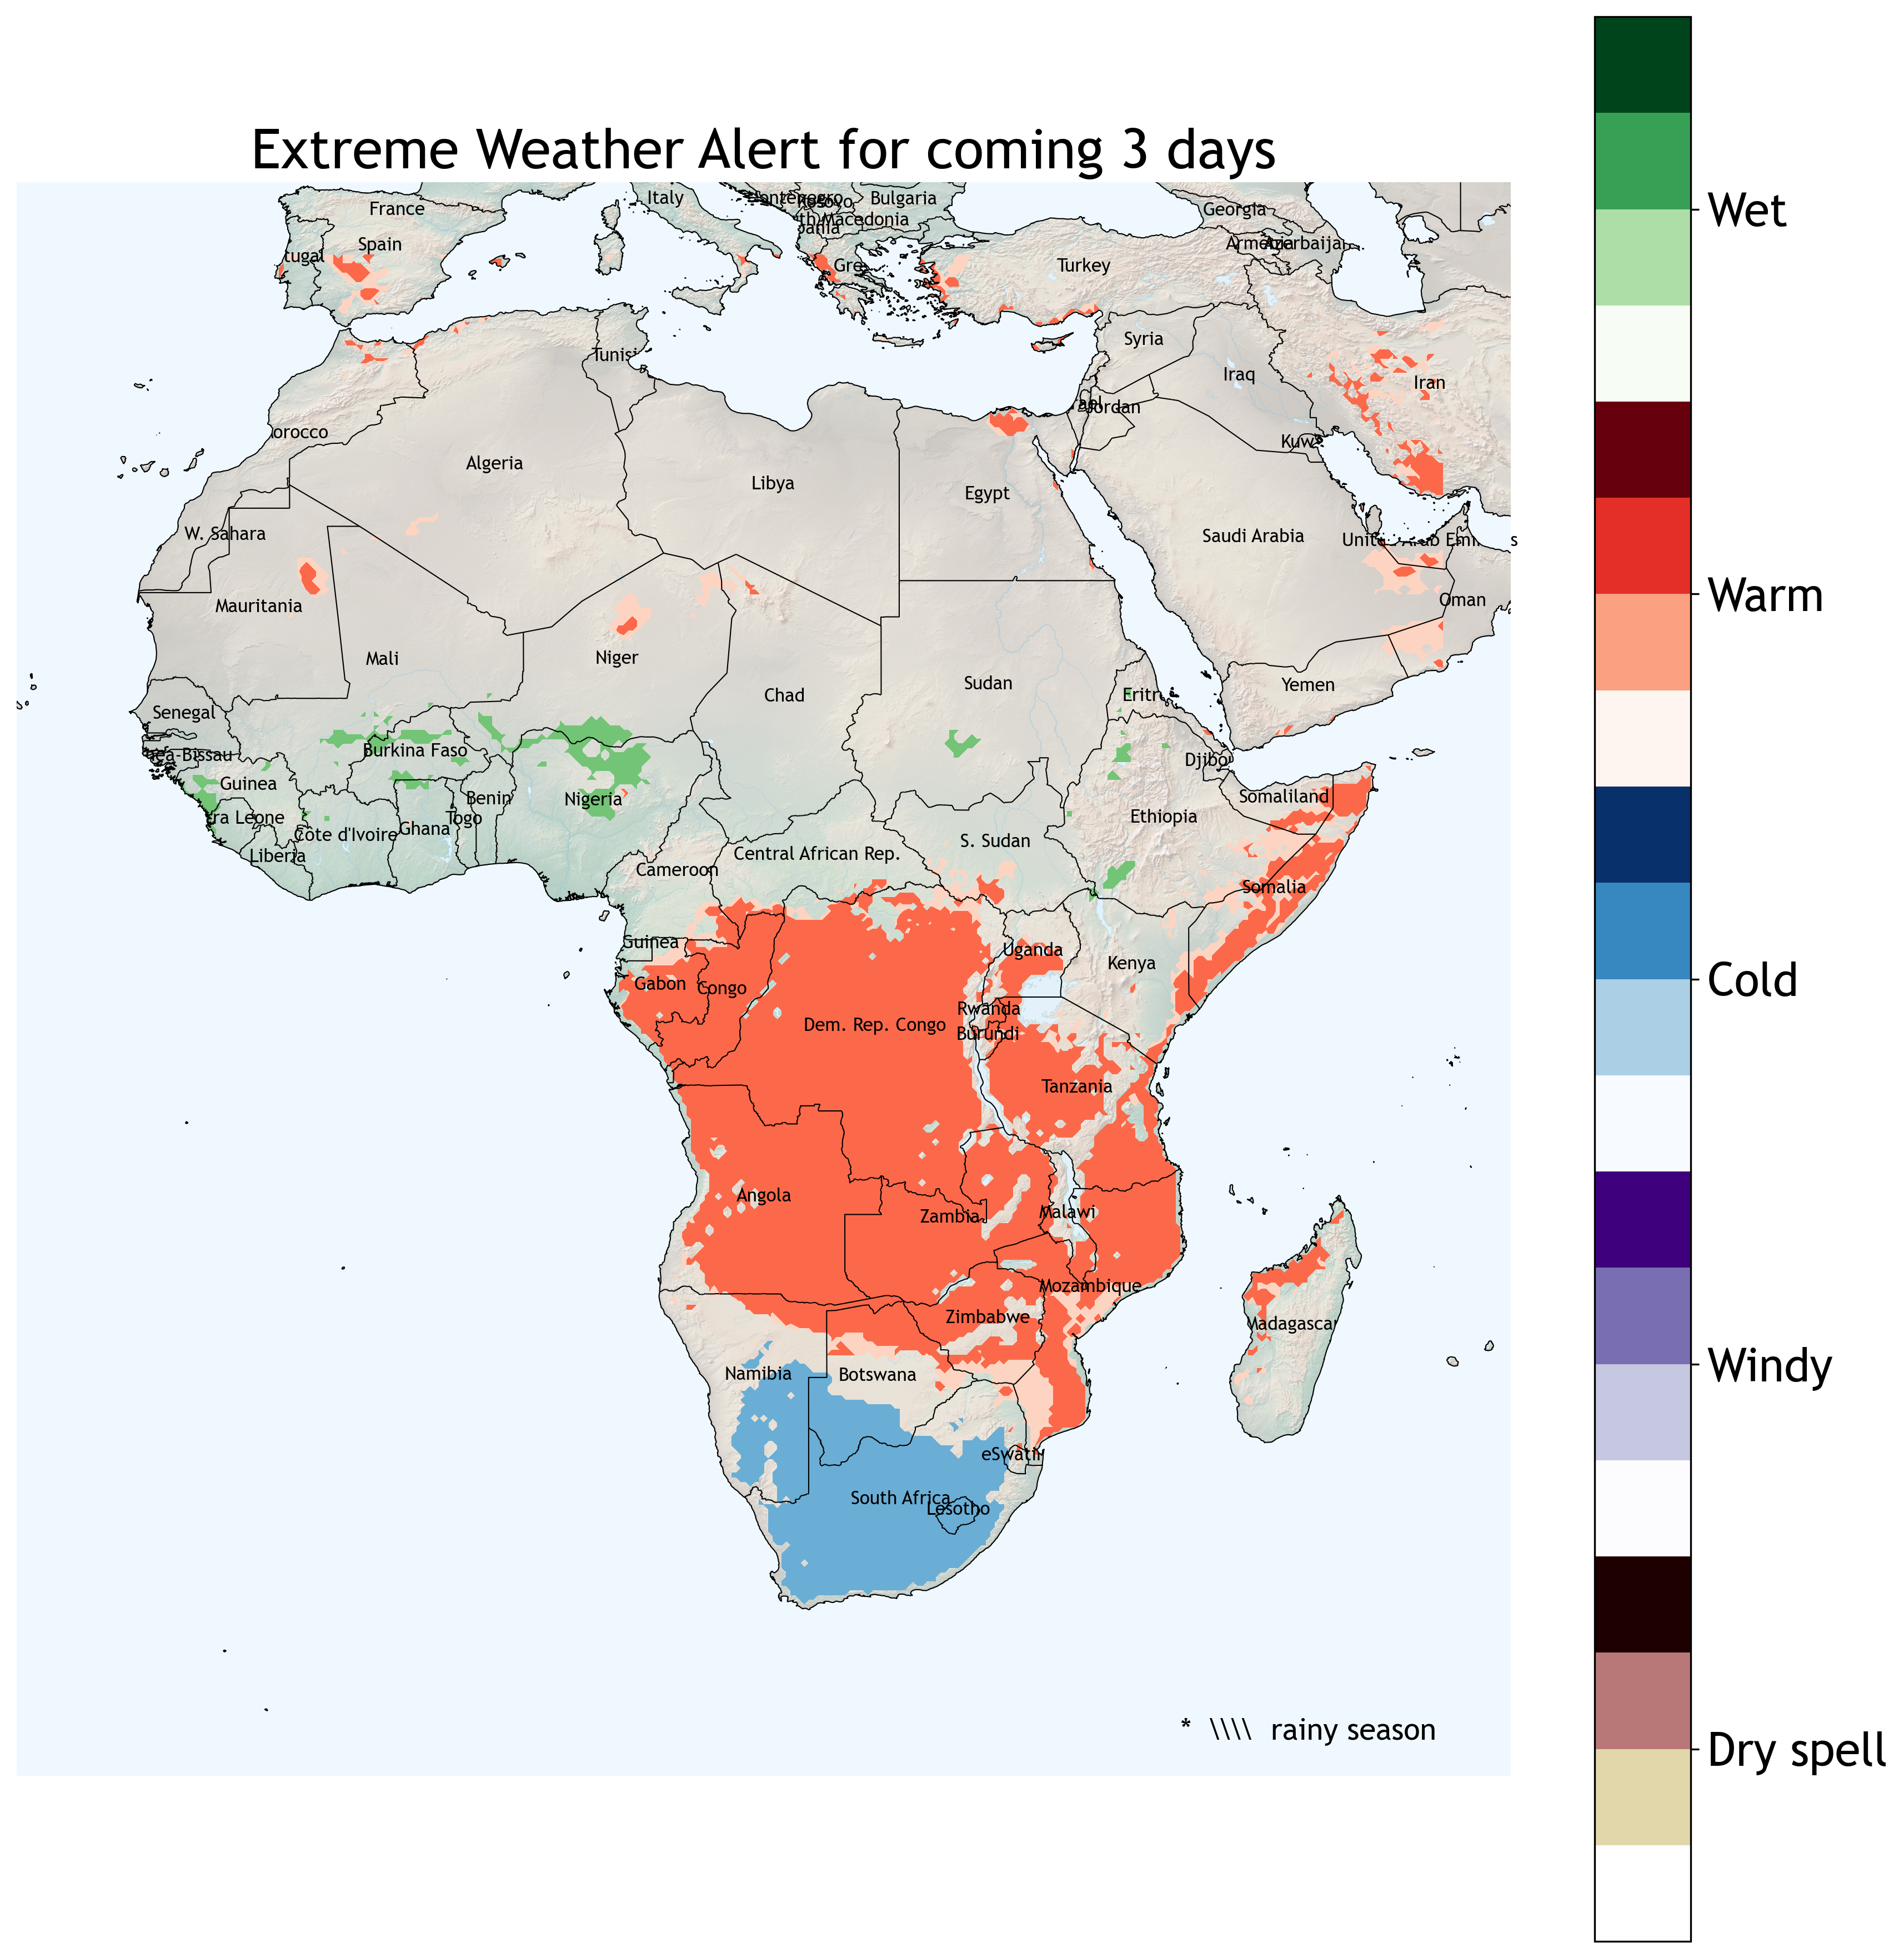 Daily updated extreme weather alert for Sub-Sahara Africa